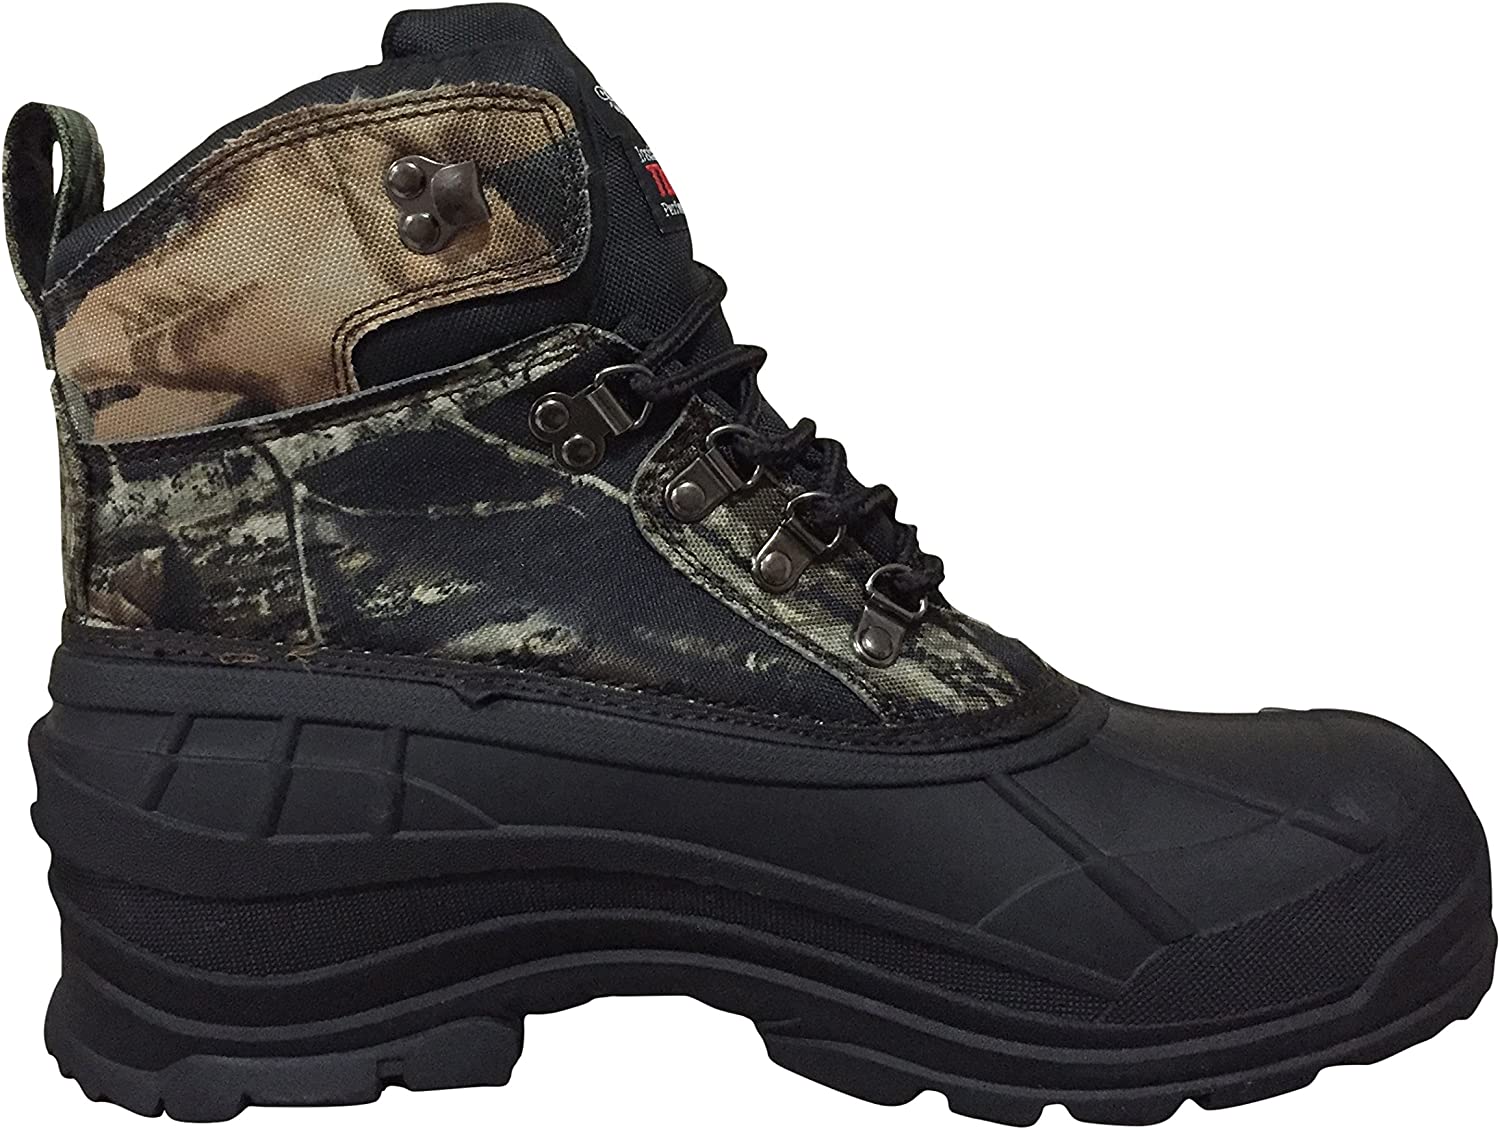 Men's Winter Snow Boots Camouflage Thermolite Insulated Hunting Shoes - image 4 of 5